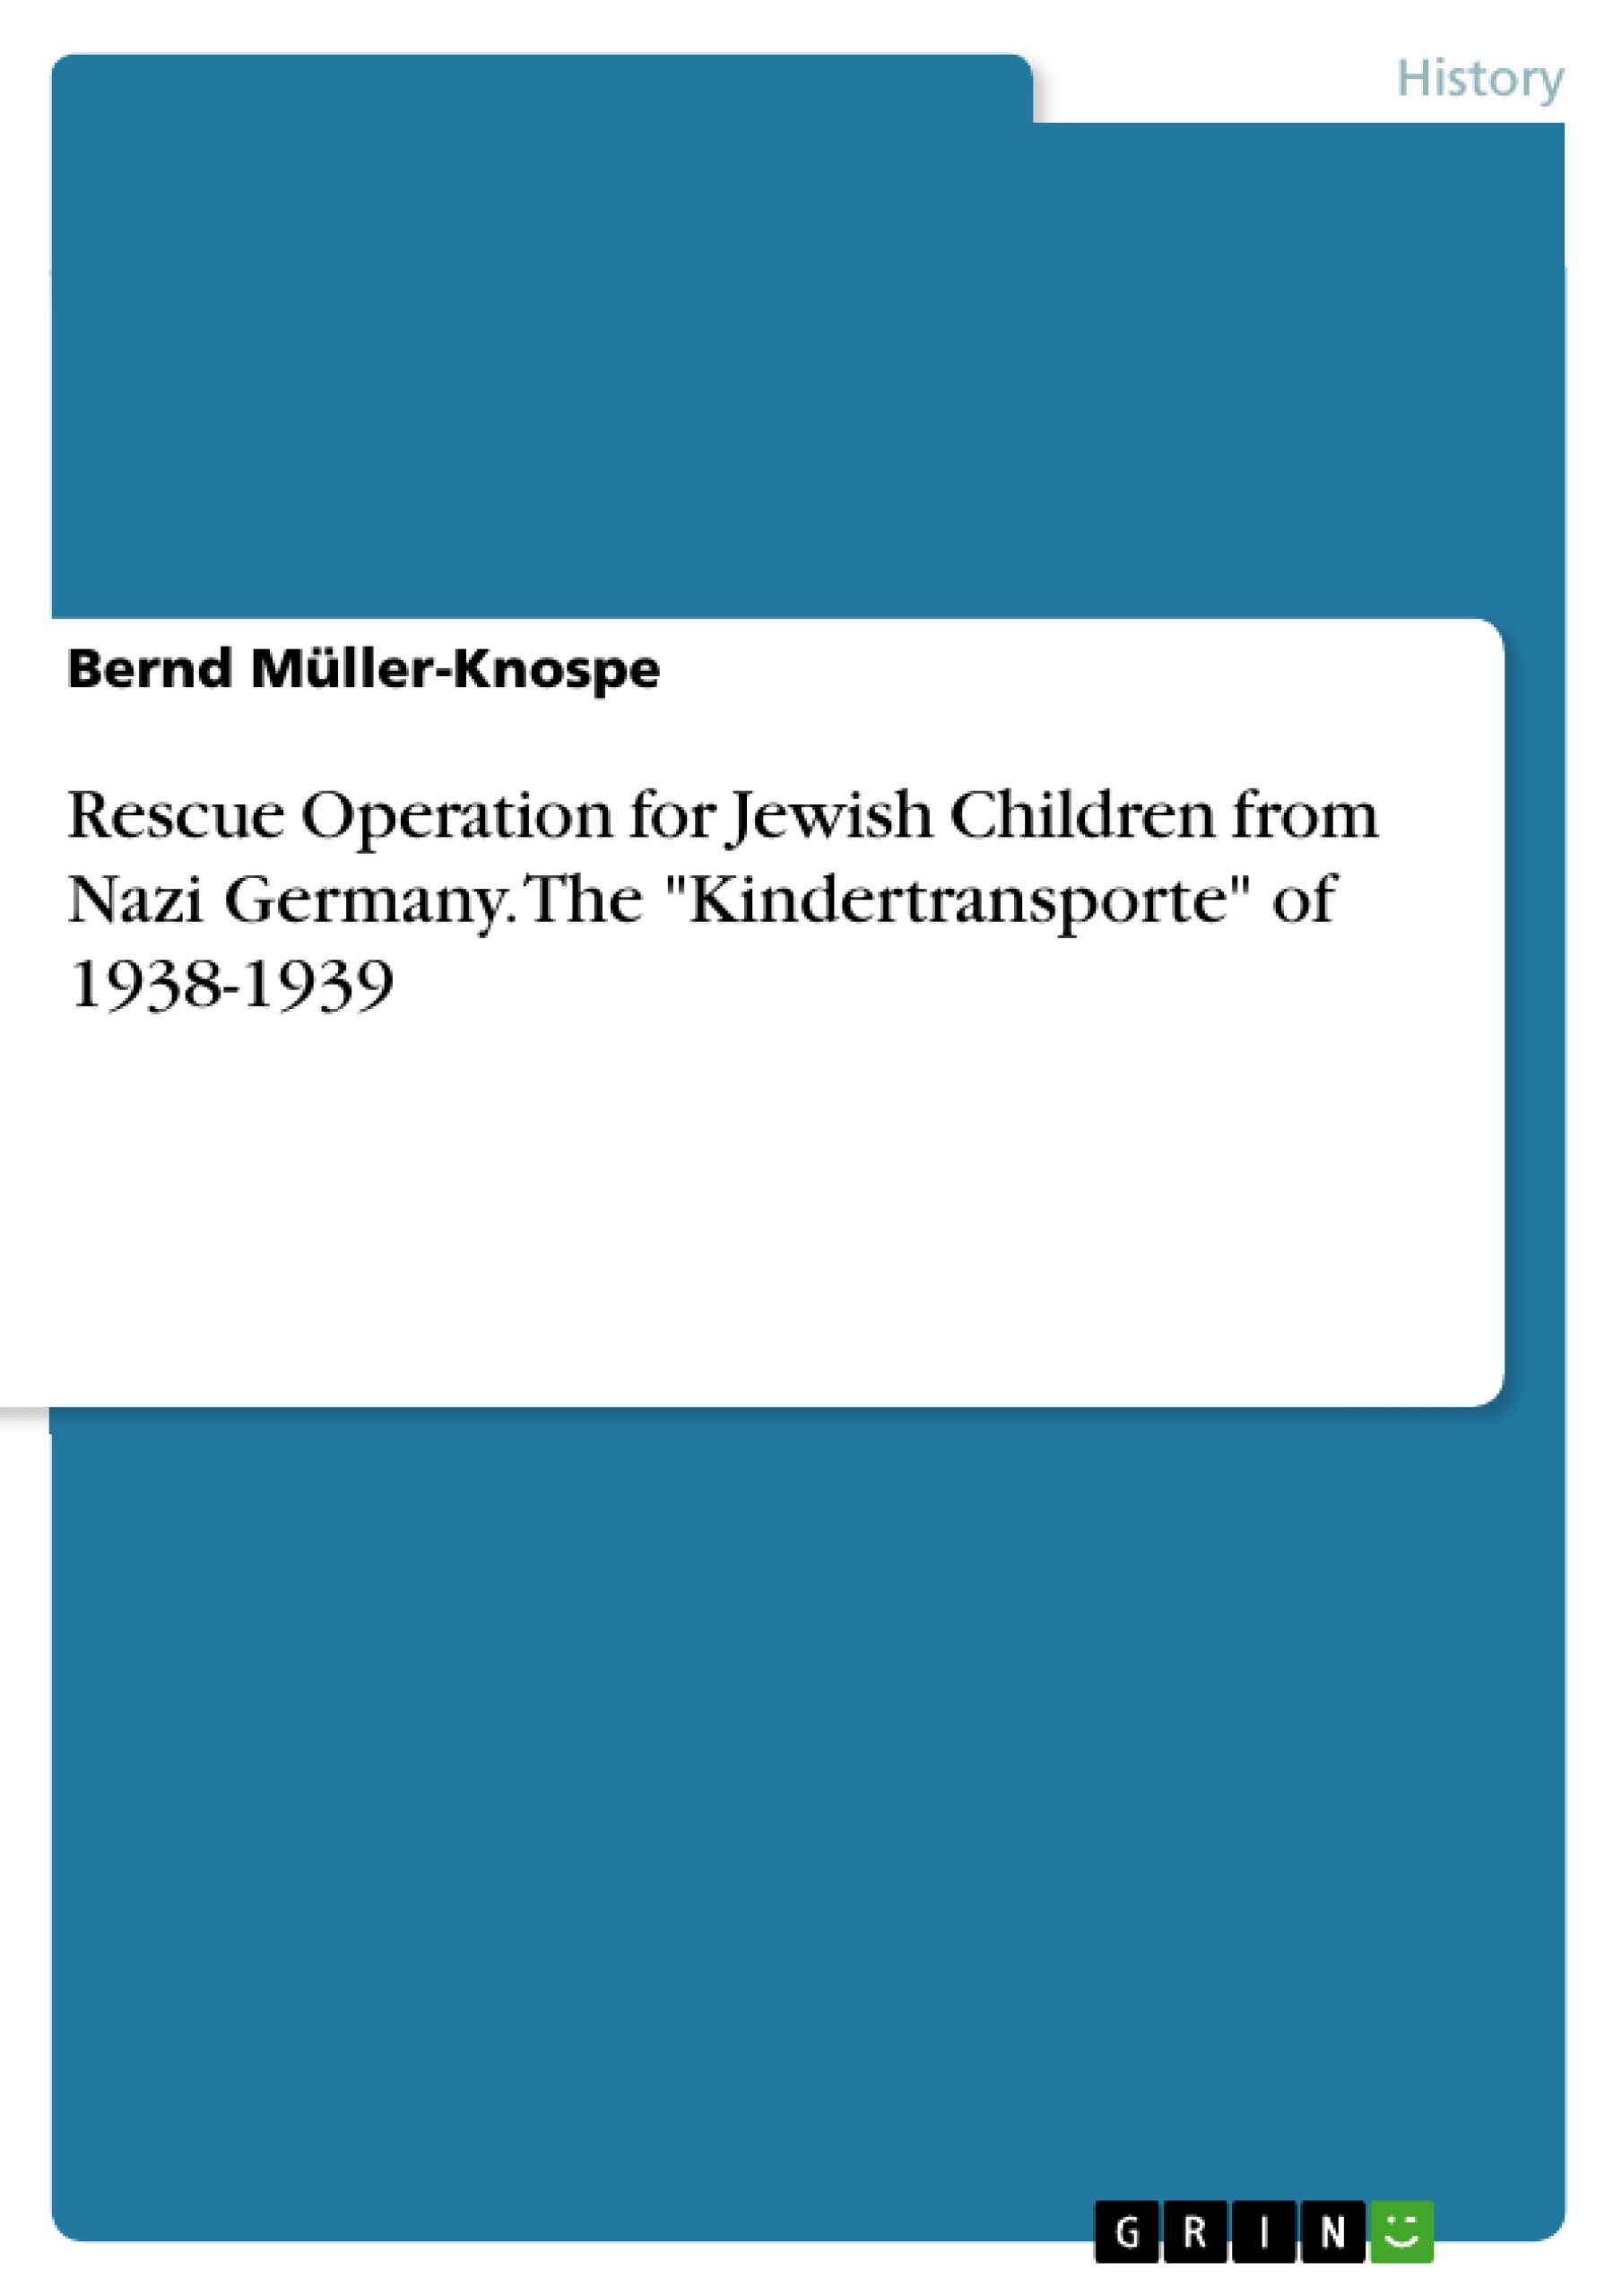 Titre: Rescue Operation for Jewish Children from Nazi Germany. The "Kindertransporte" of 1938-1939